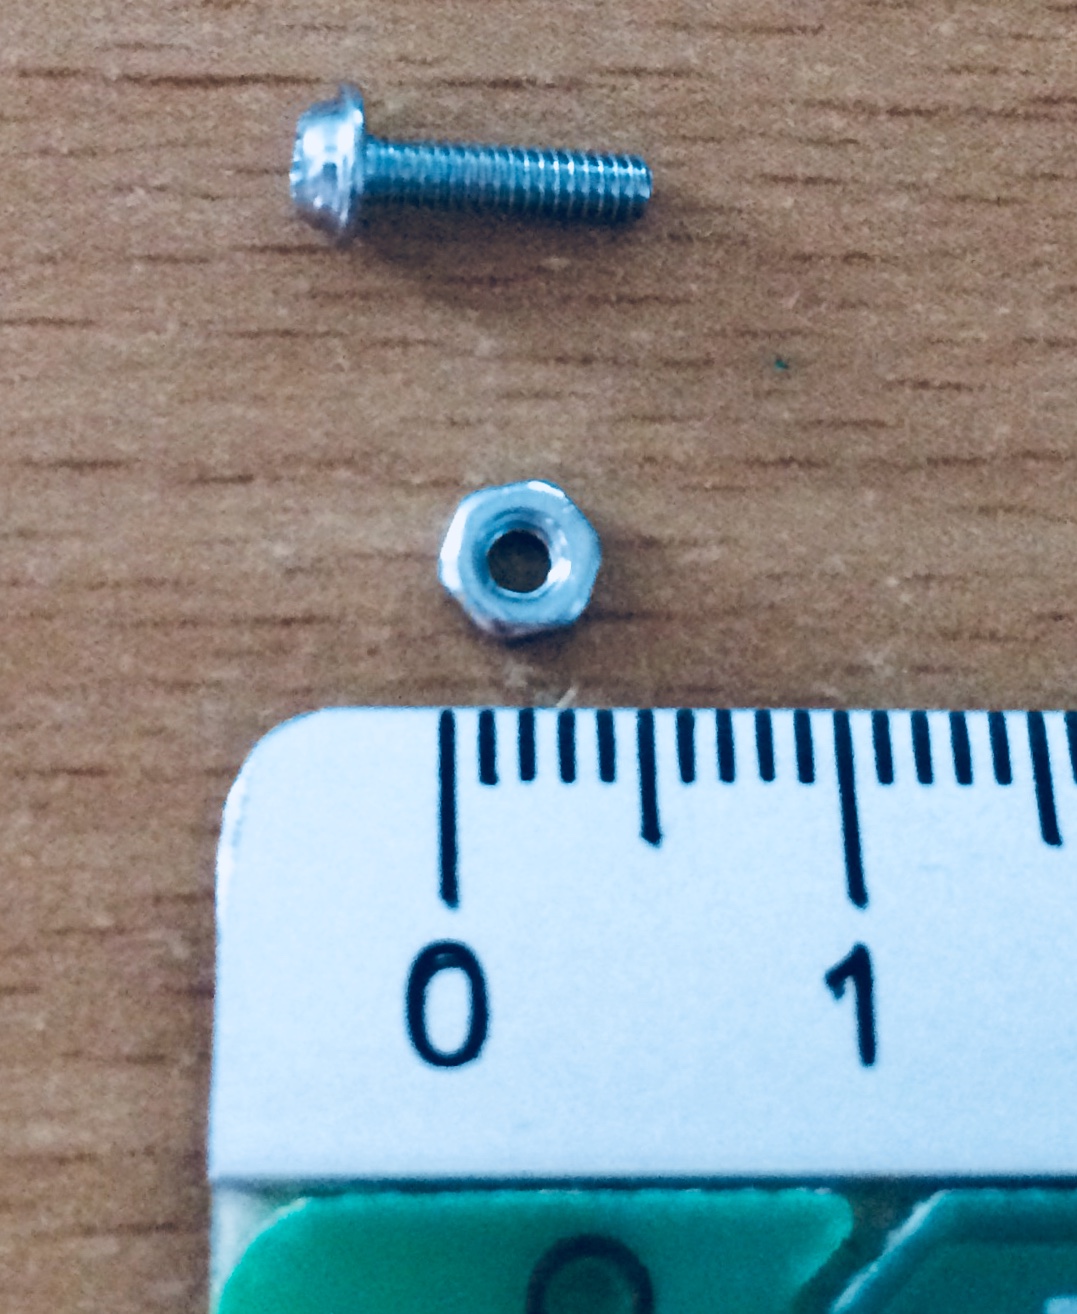 nut and bolt next to a ruler for scale